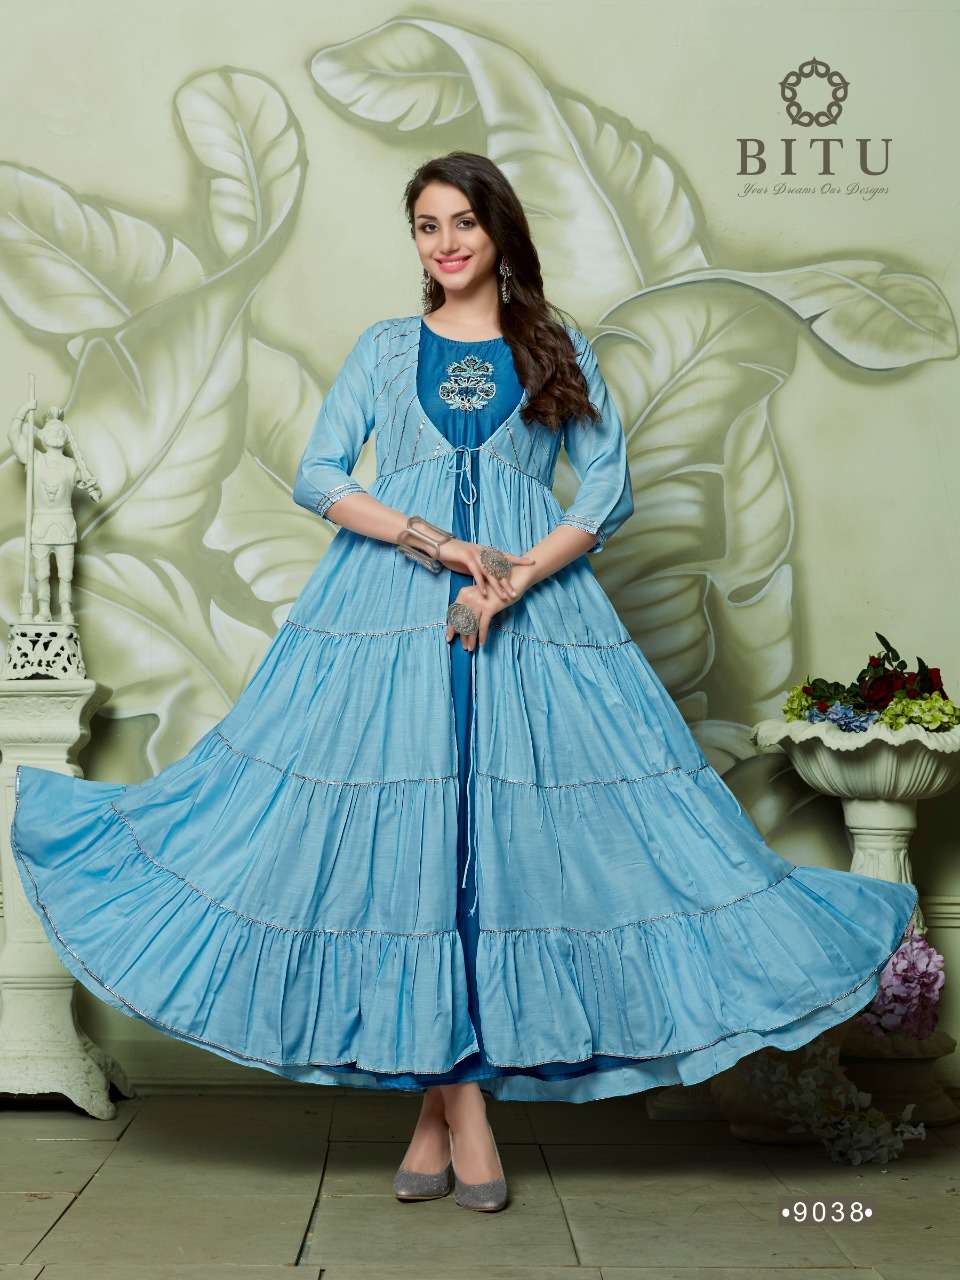 Autograph By Bitu 9032 To 9040 Series Beautiful Stylish Fancy Colorful Casual Wear & Ethnic Wear & Ready To Wear Muslin With China Cotton Kurtis At Wholesale Price